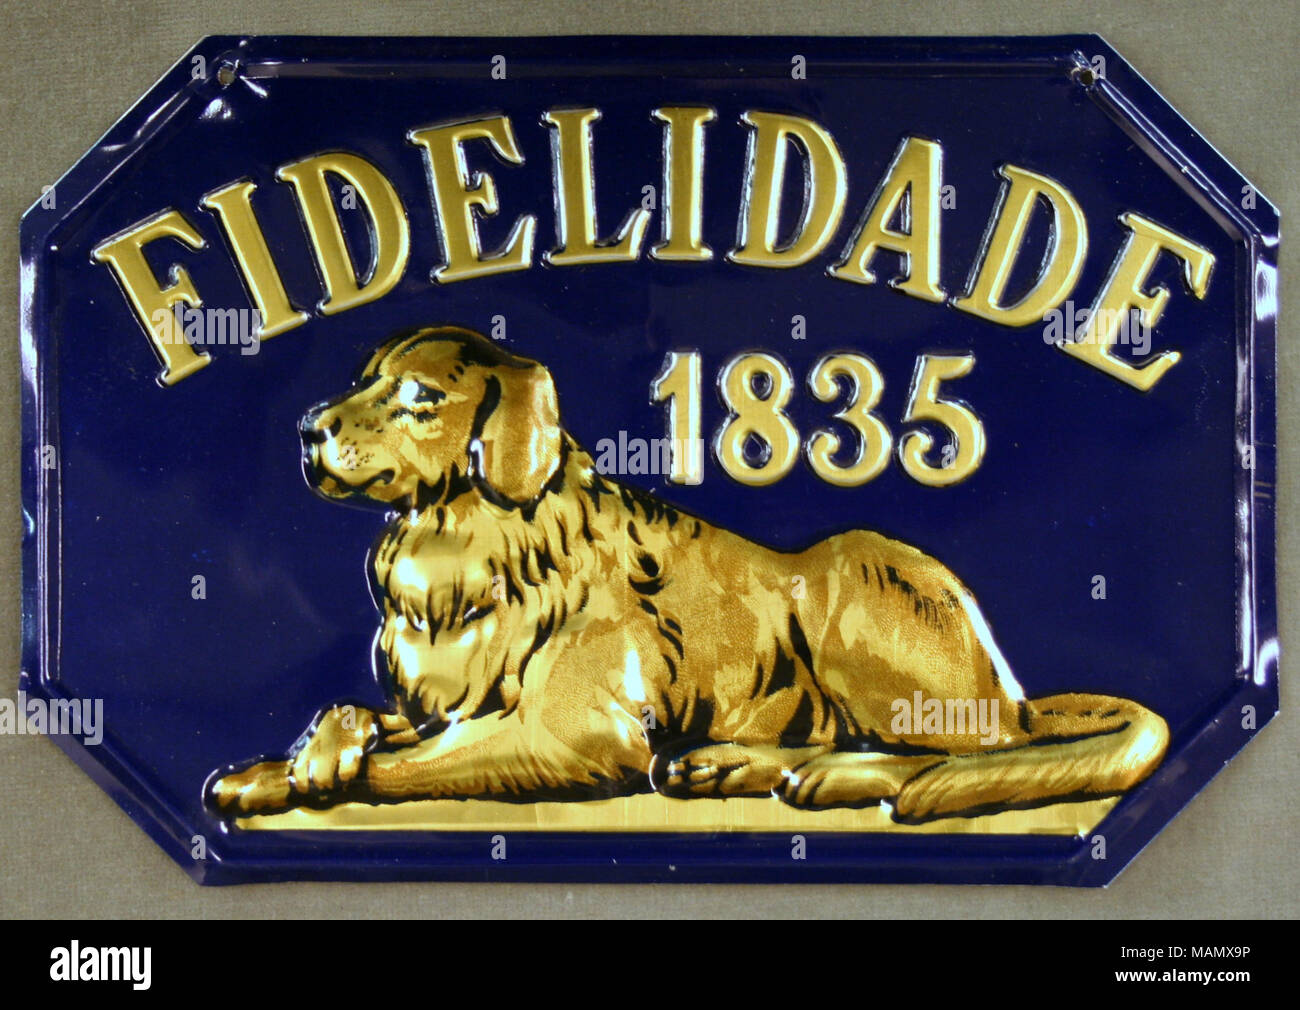 Pressed tin firemark for Companhia de Seguros Fidelidade in Lisbon, Portugal showing raised gold dog lying down with compnay name also in gold on dark blue background Title: Fire mark for Companhia de Seguros Fidelidade in Lisbon, Portugal  . after 1835. Stock Photo